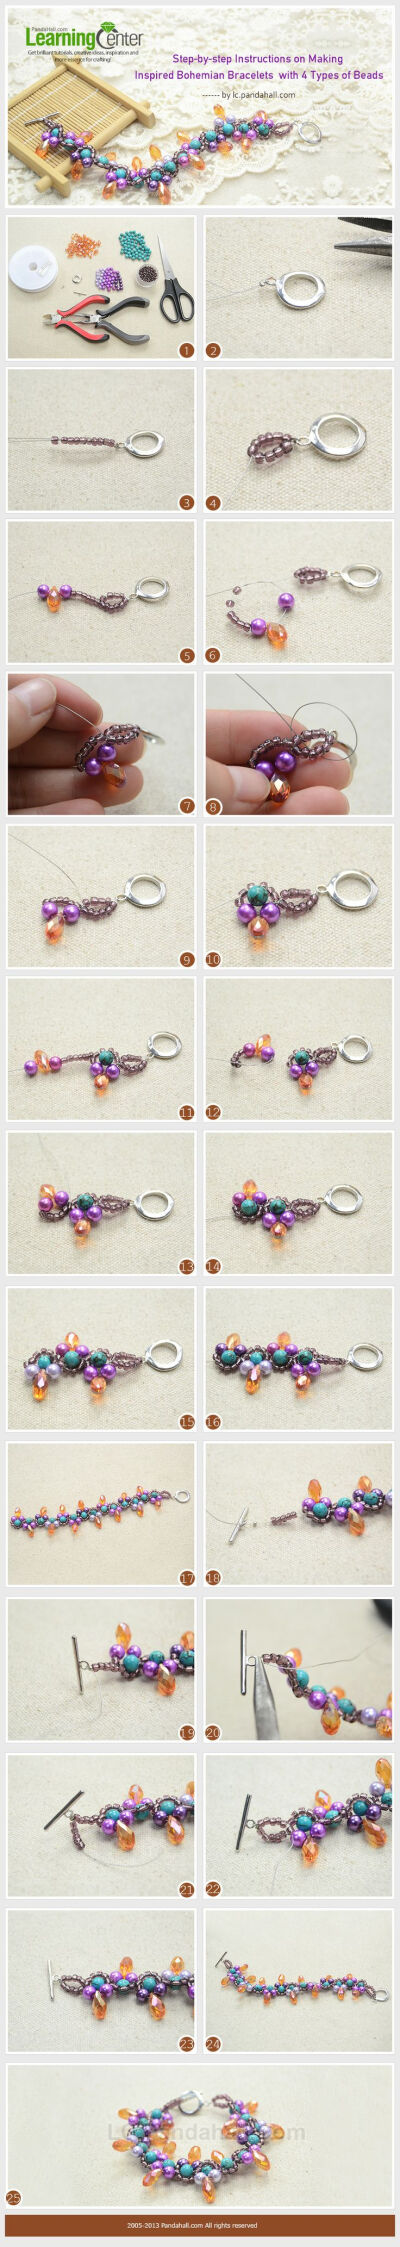 Step-by-step Instructions on Making Inspired Bohemian Bracelets with 4 Types of Beads